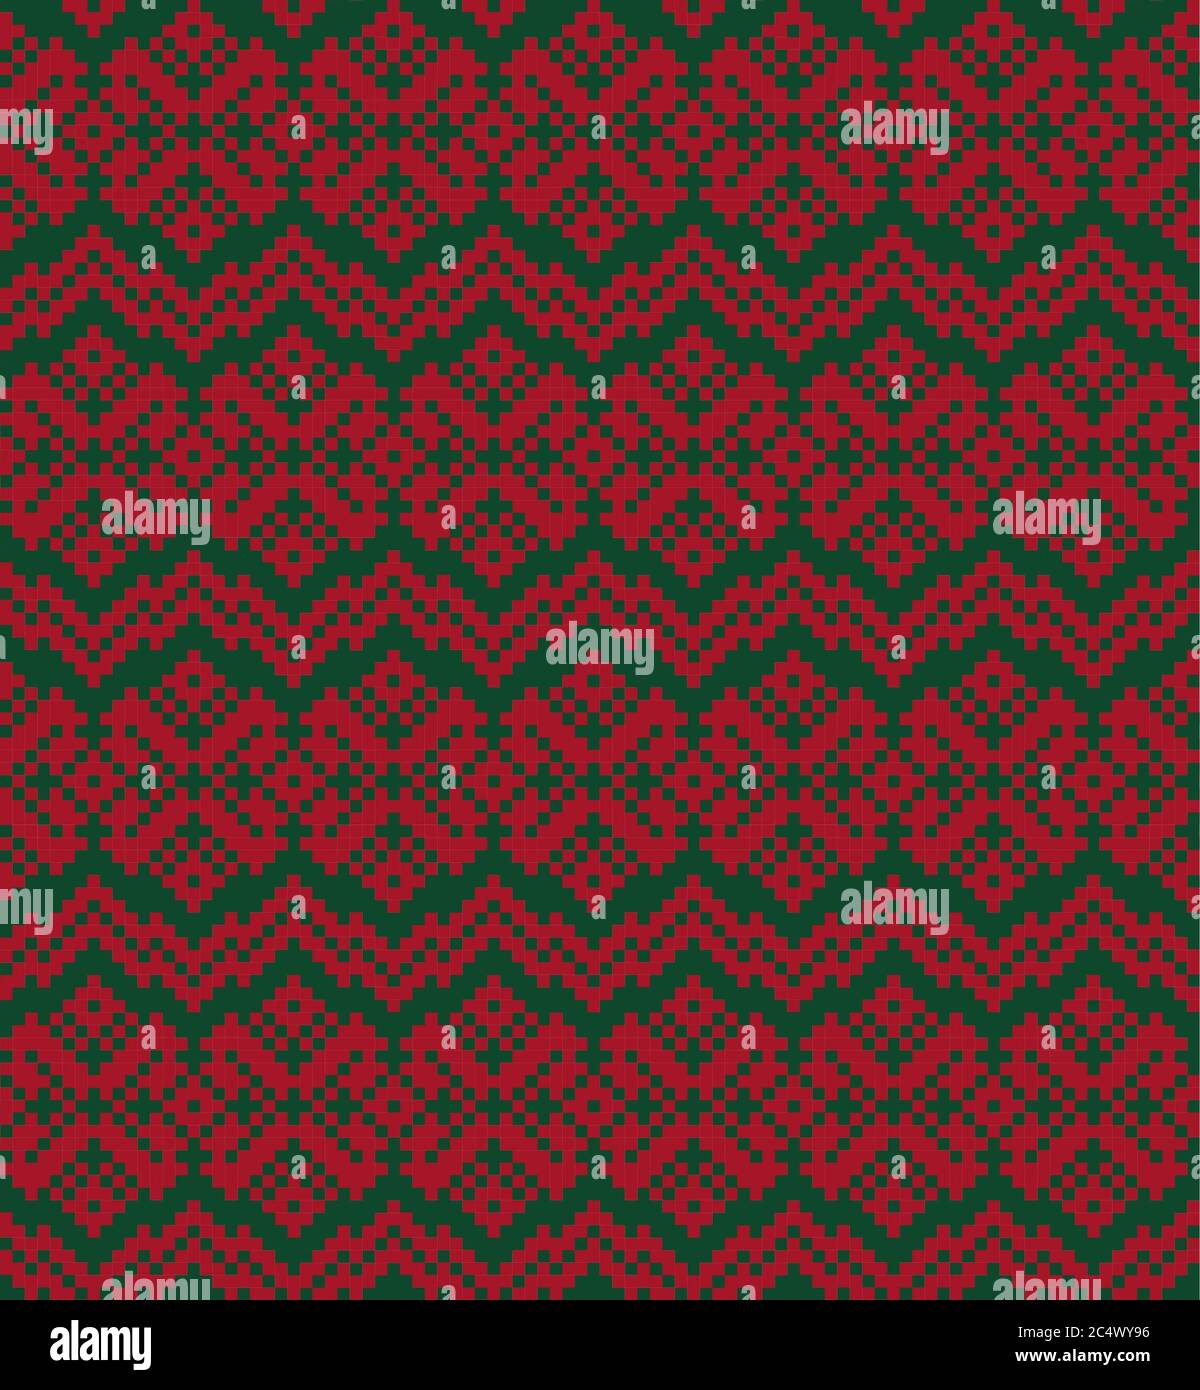 Christmas fair isle pattern background for fashion textiles, knitwear and graphics Stock Photo